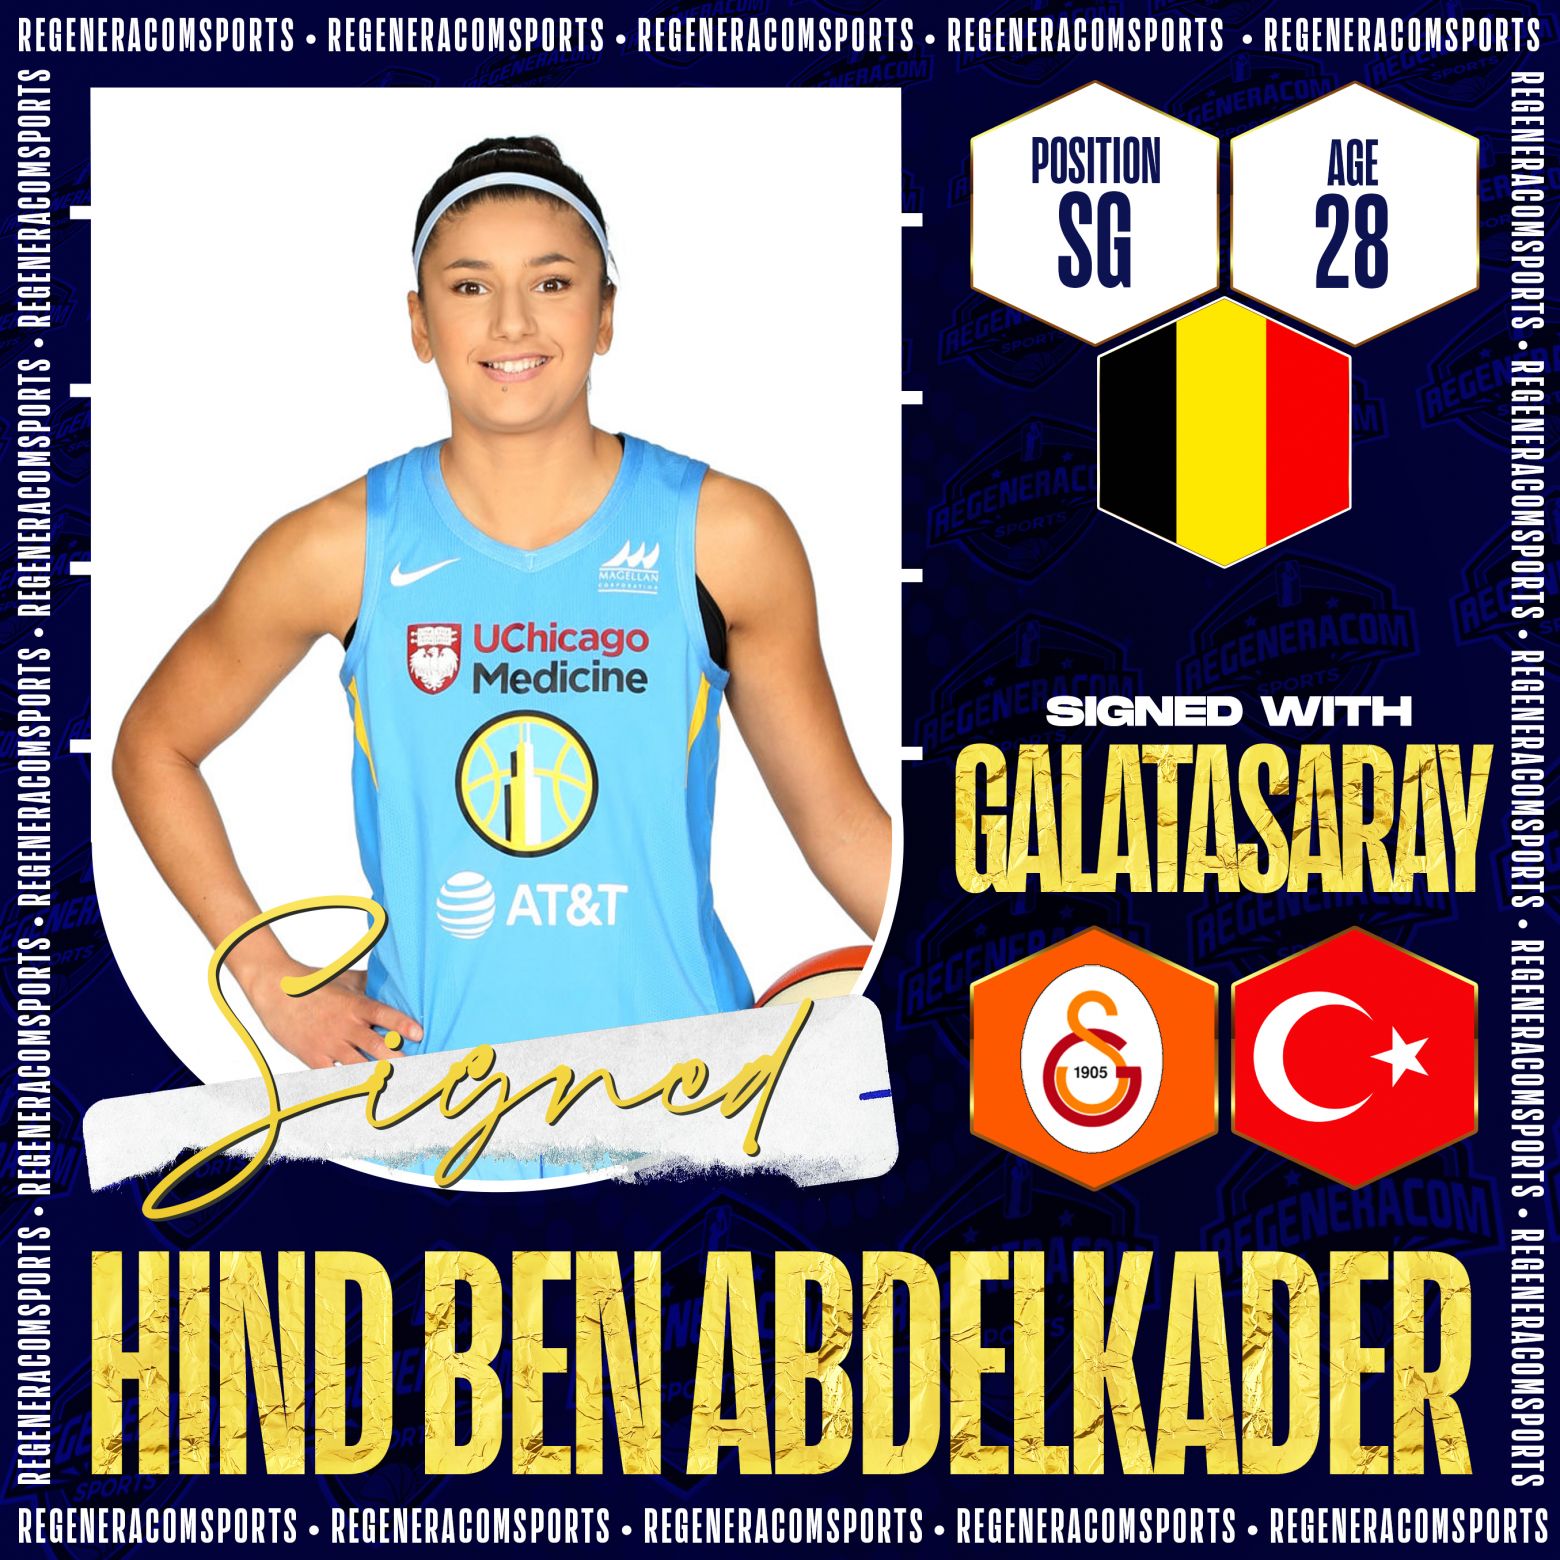 HIND BEN ABDELKADER has signed with Galatasaray for the 2022/23 season